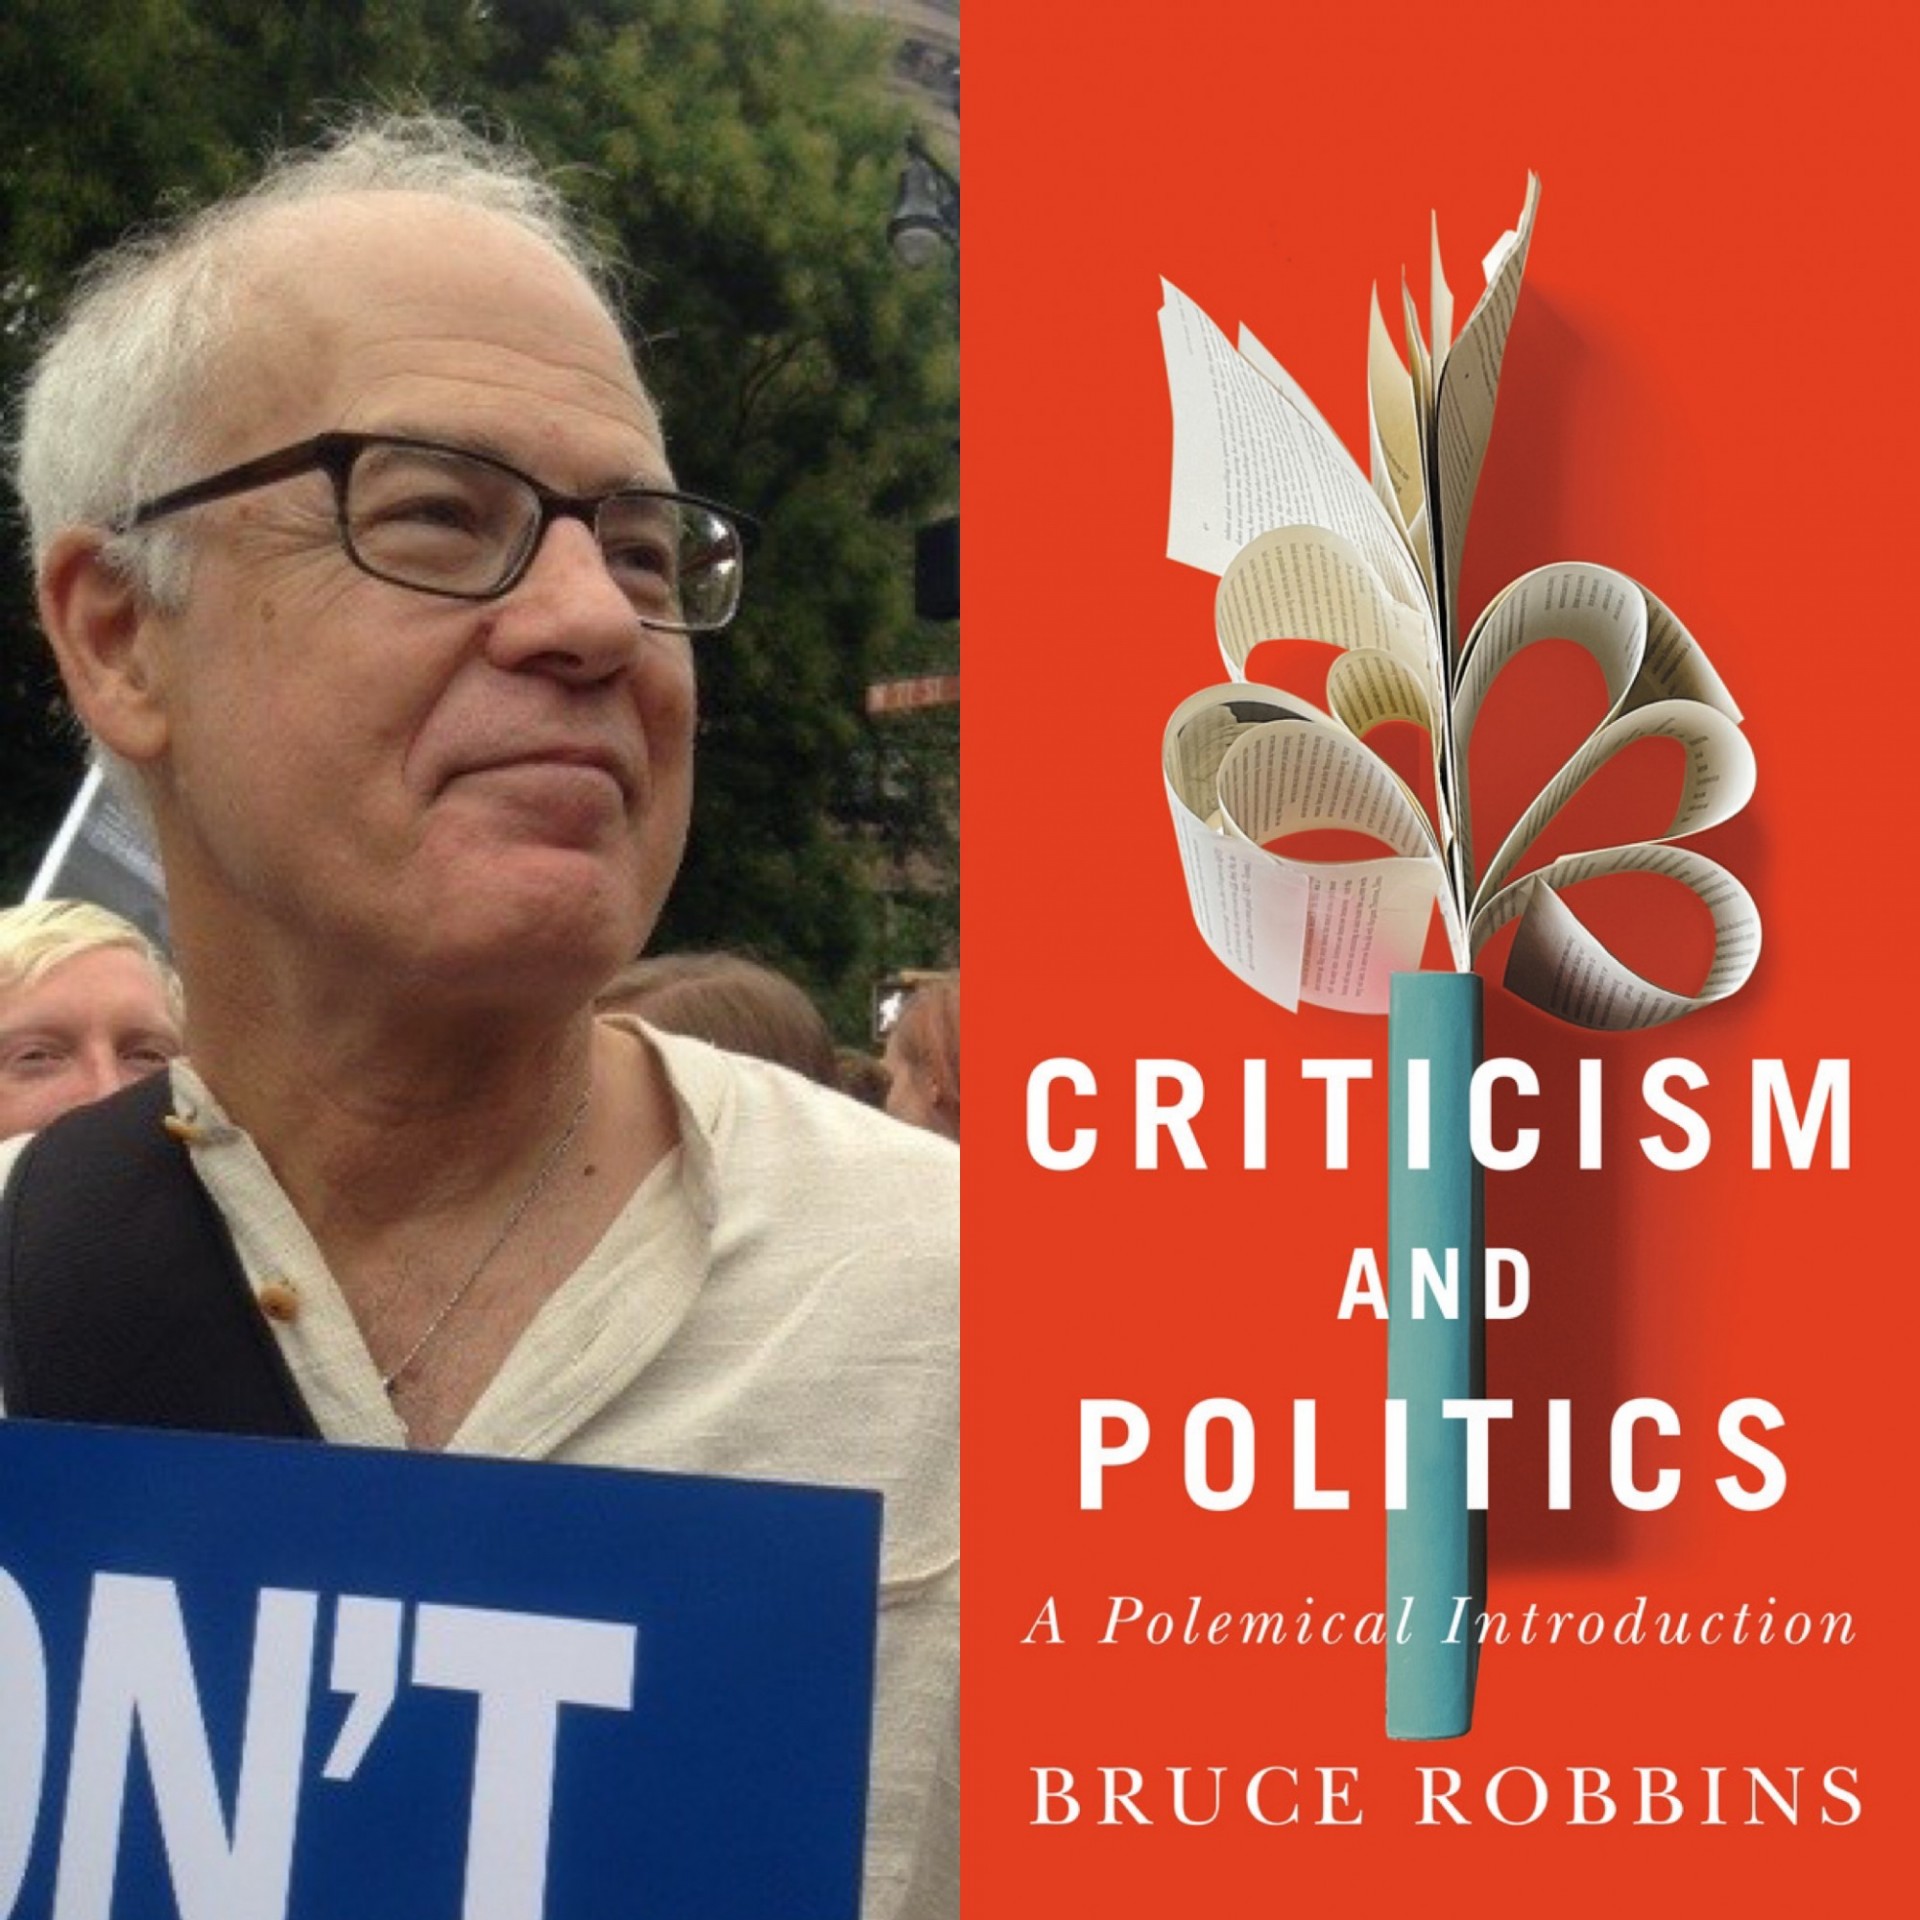 Photograph of Bruce Robbins next to the cover of his new book, Criticism and Politics